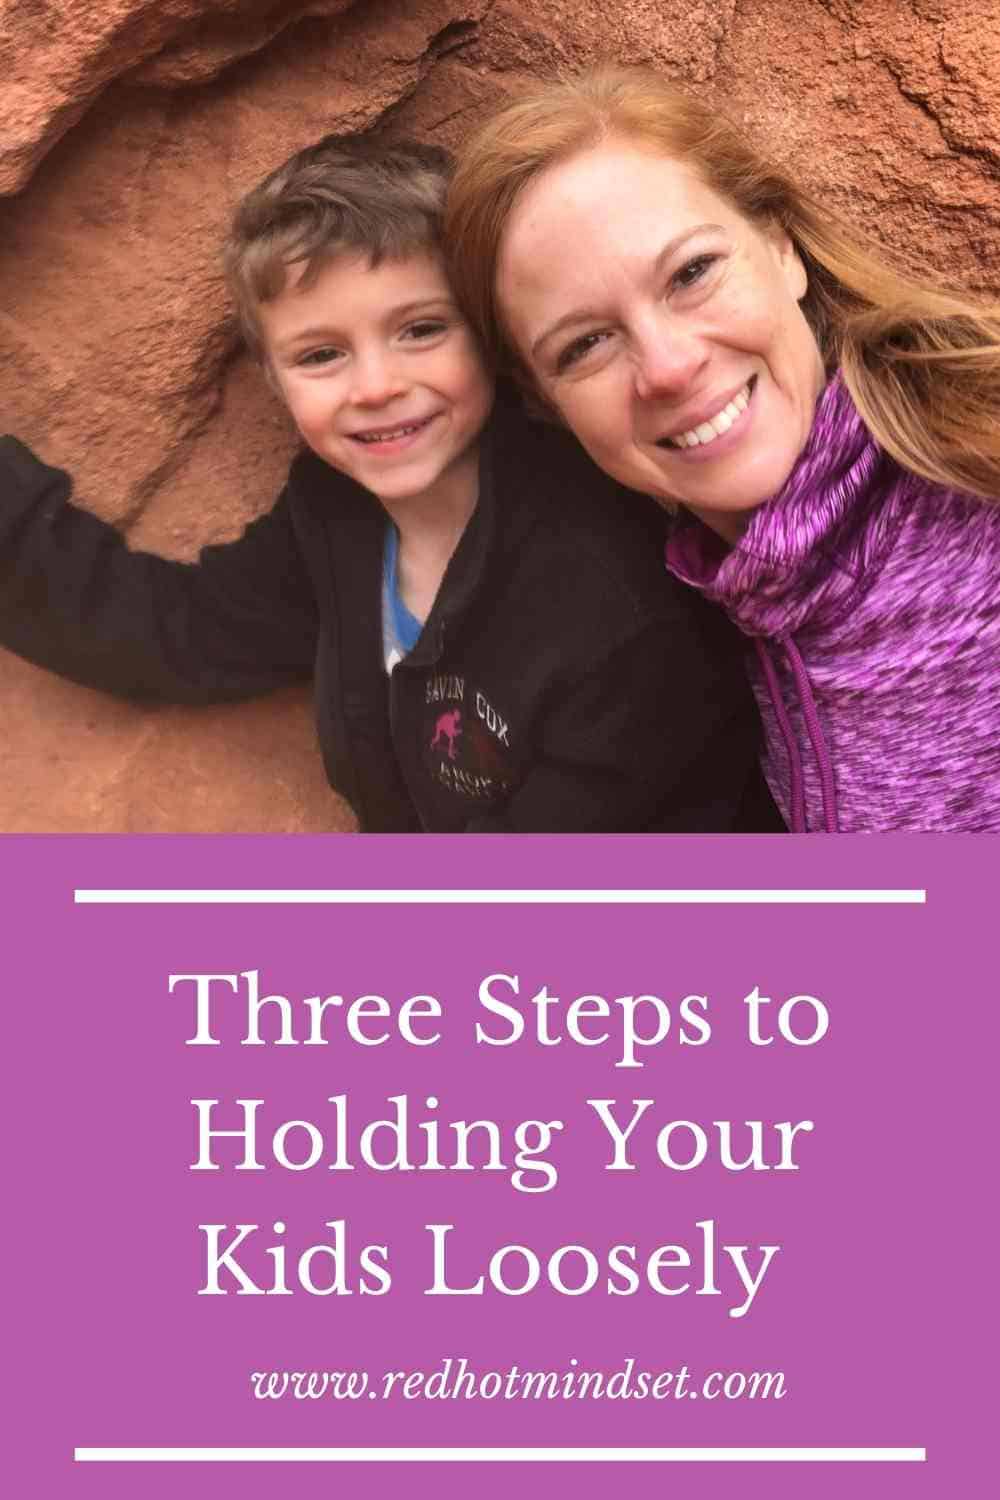 Three Steps to Hold Loosely to Our Kids